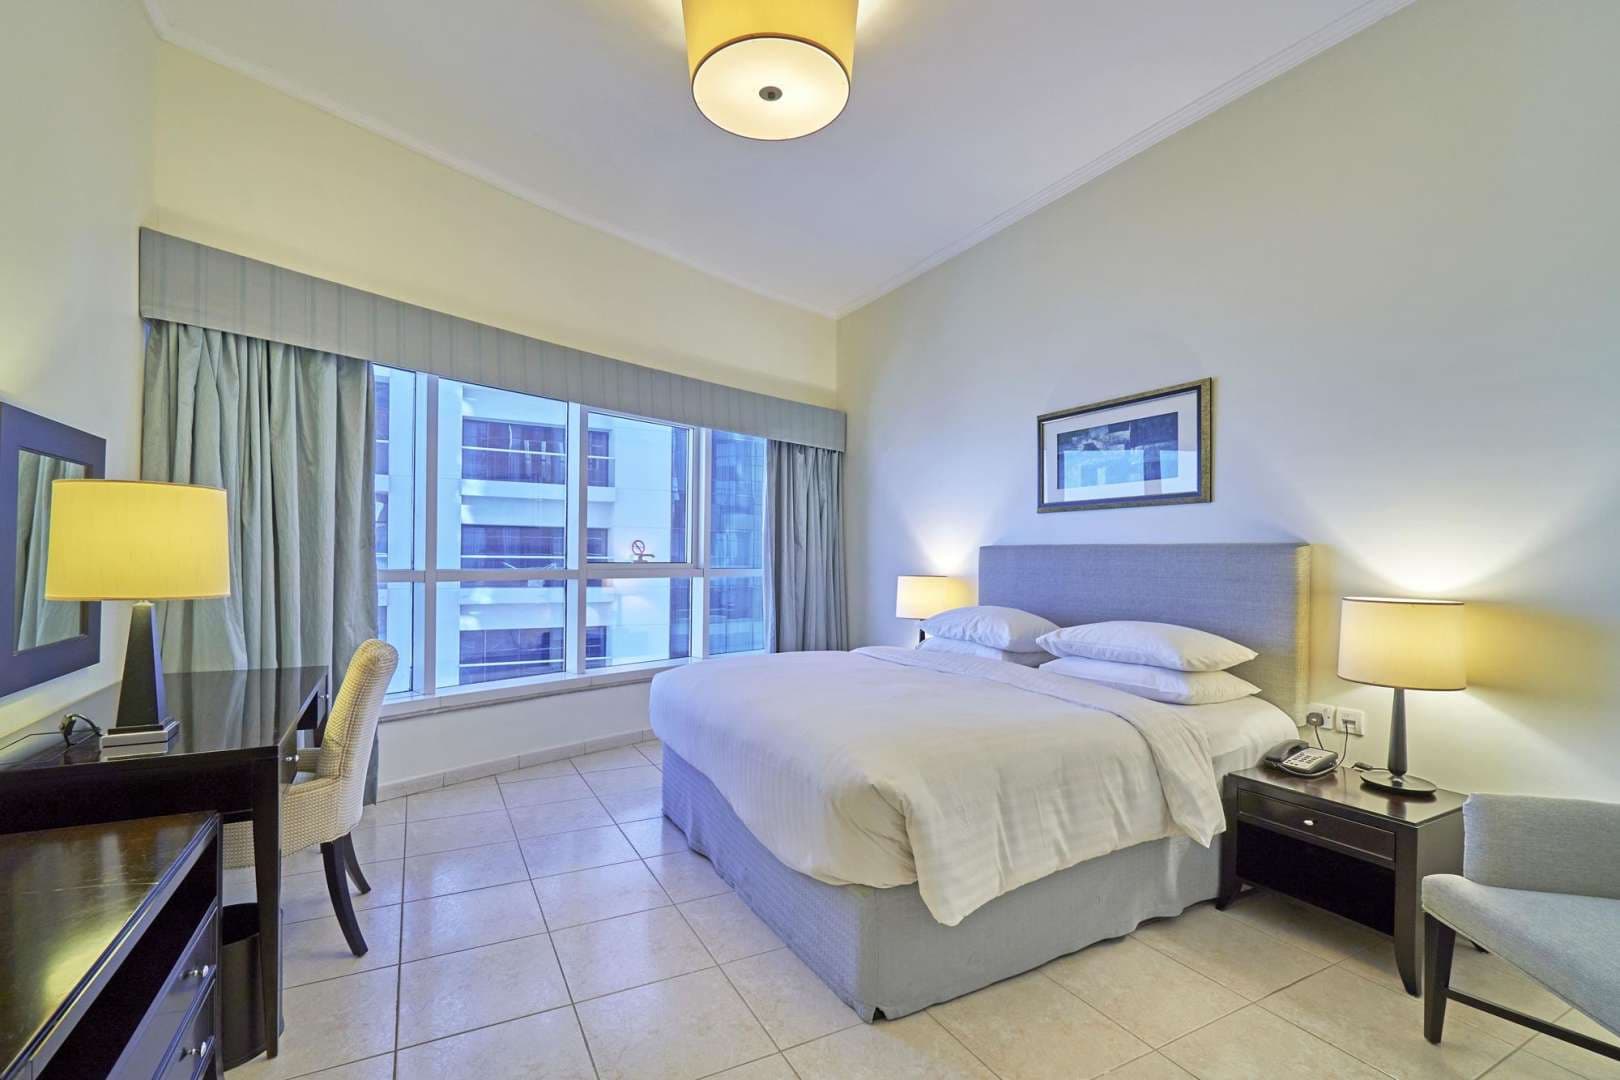 3 Bedroom Apartment For Short Term Marriott Harbour Hotel And Suites Lp05710 A51fb61aad41680.jpg